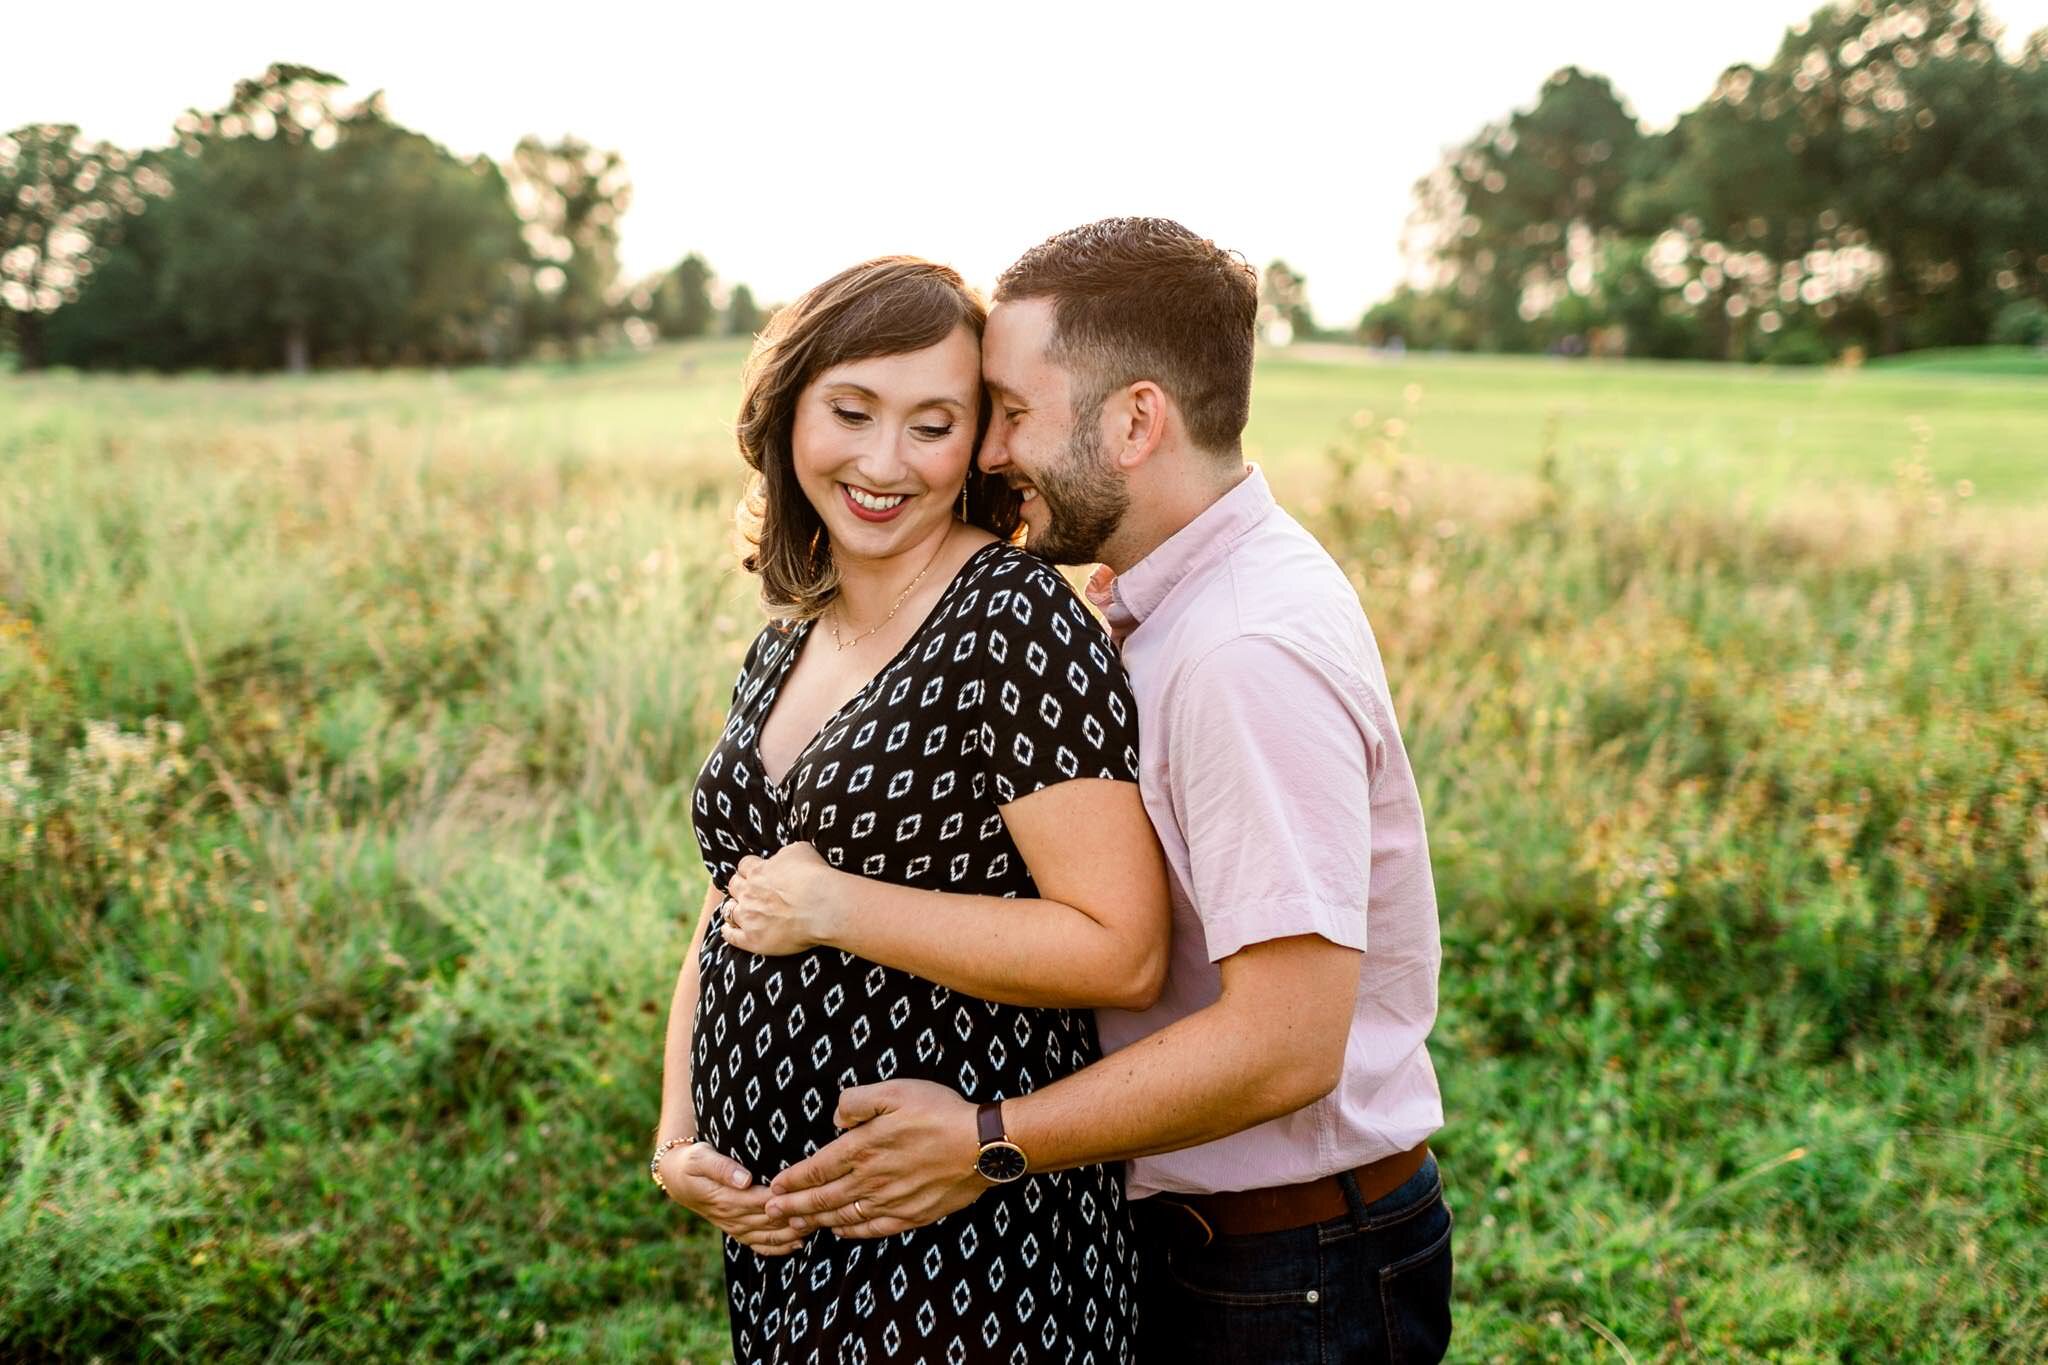 Raleigh Maternity Photographer | By G. Lin Photography | NC Museum of Art | Husband and wife laughing and smiling while standing in open field